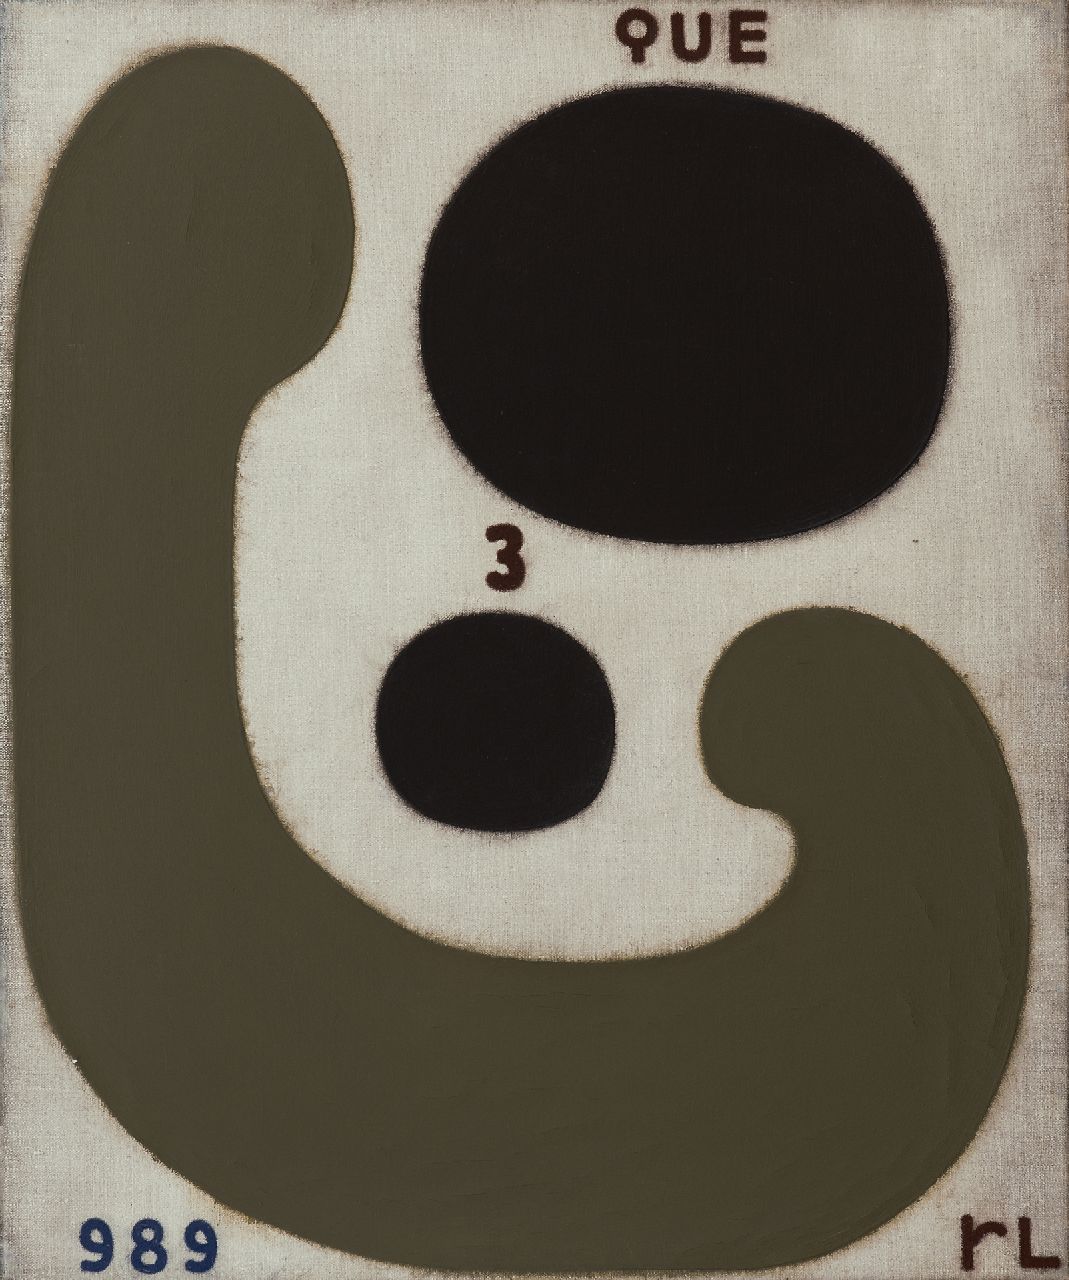 Reinier Lucassen | QUE 3, oil with marblepowder on canvas, 60.2 x 50.0 cm, signed l.r. with initials and in full on the reverse and dated 89-94 on the reverse